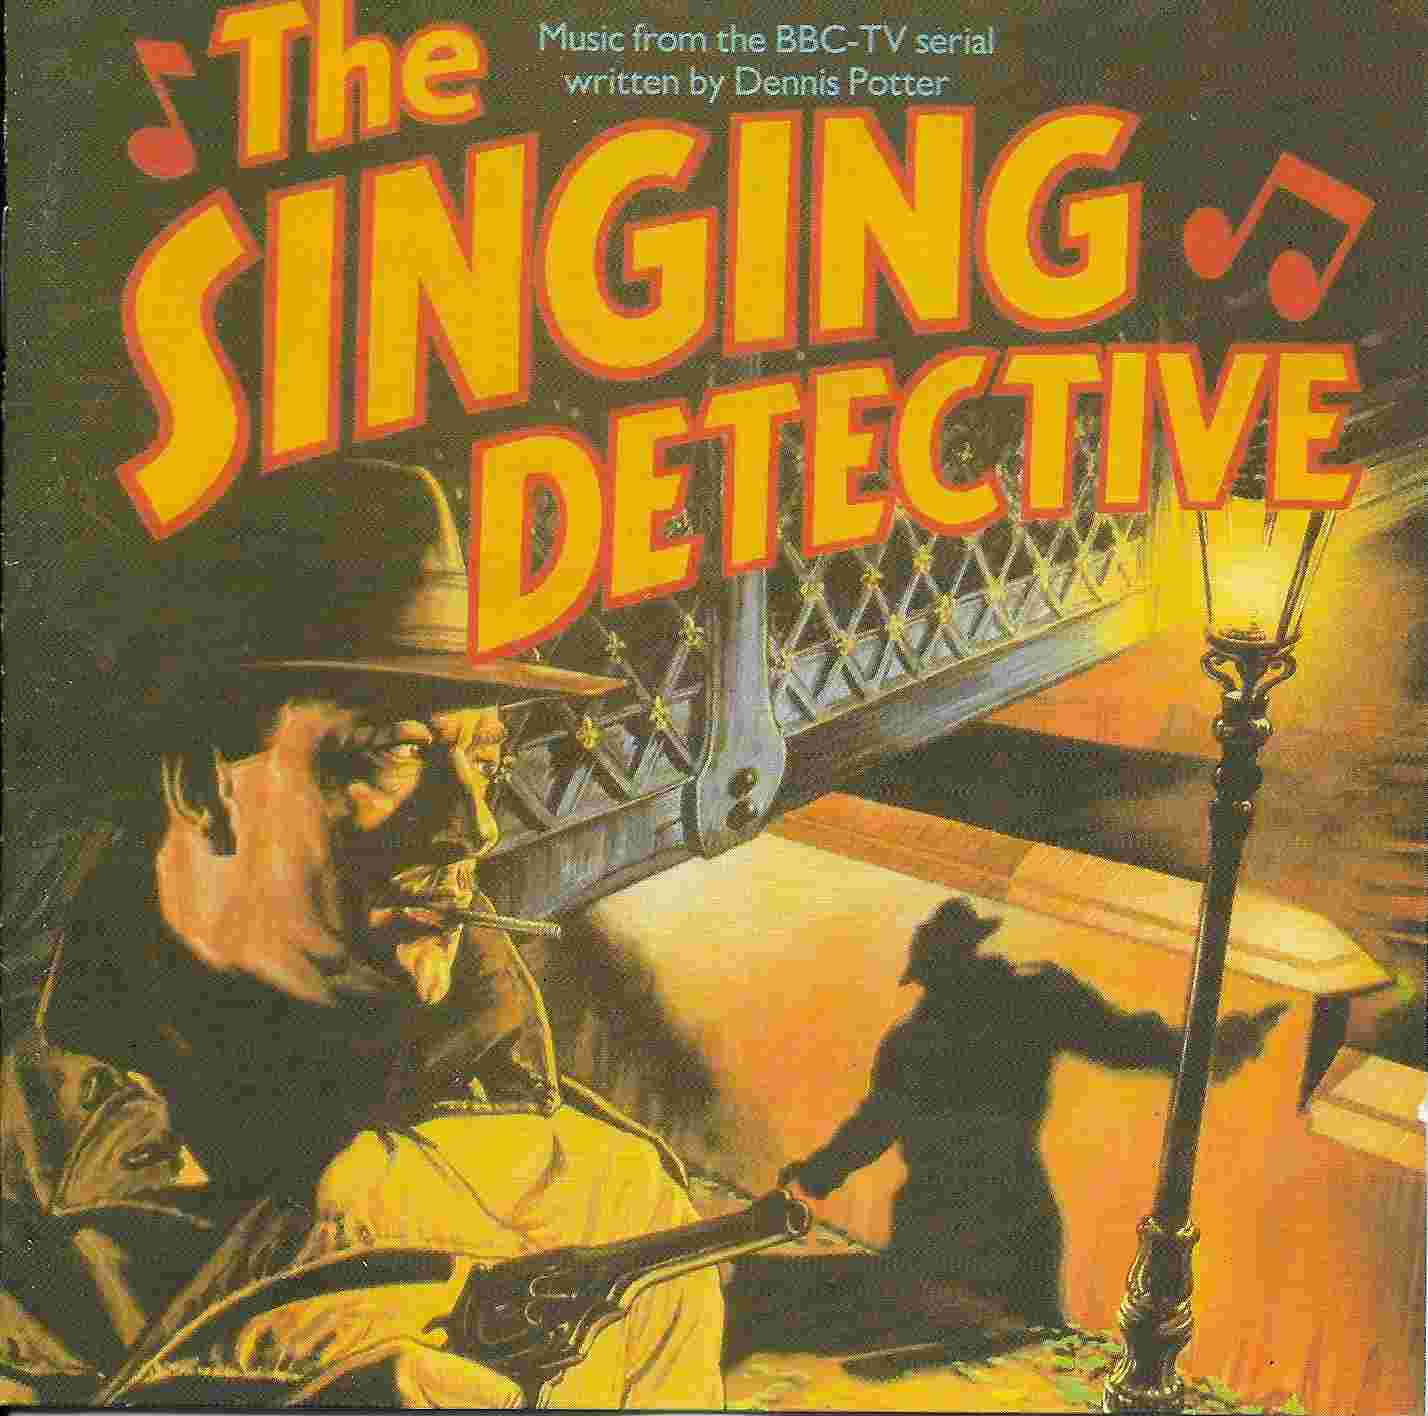 Picture of The singing detective by artist Various from the BBC cds - Records and Tapes library